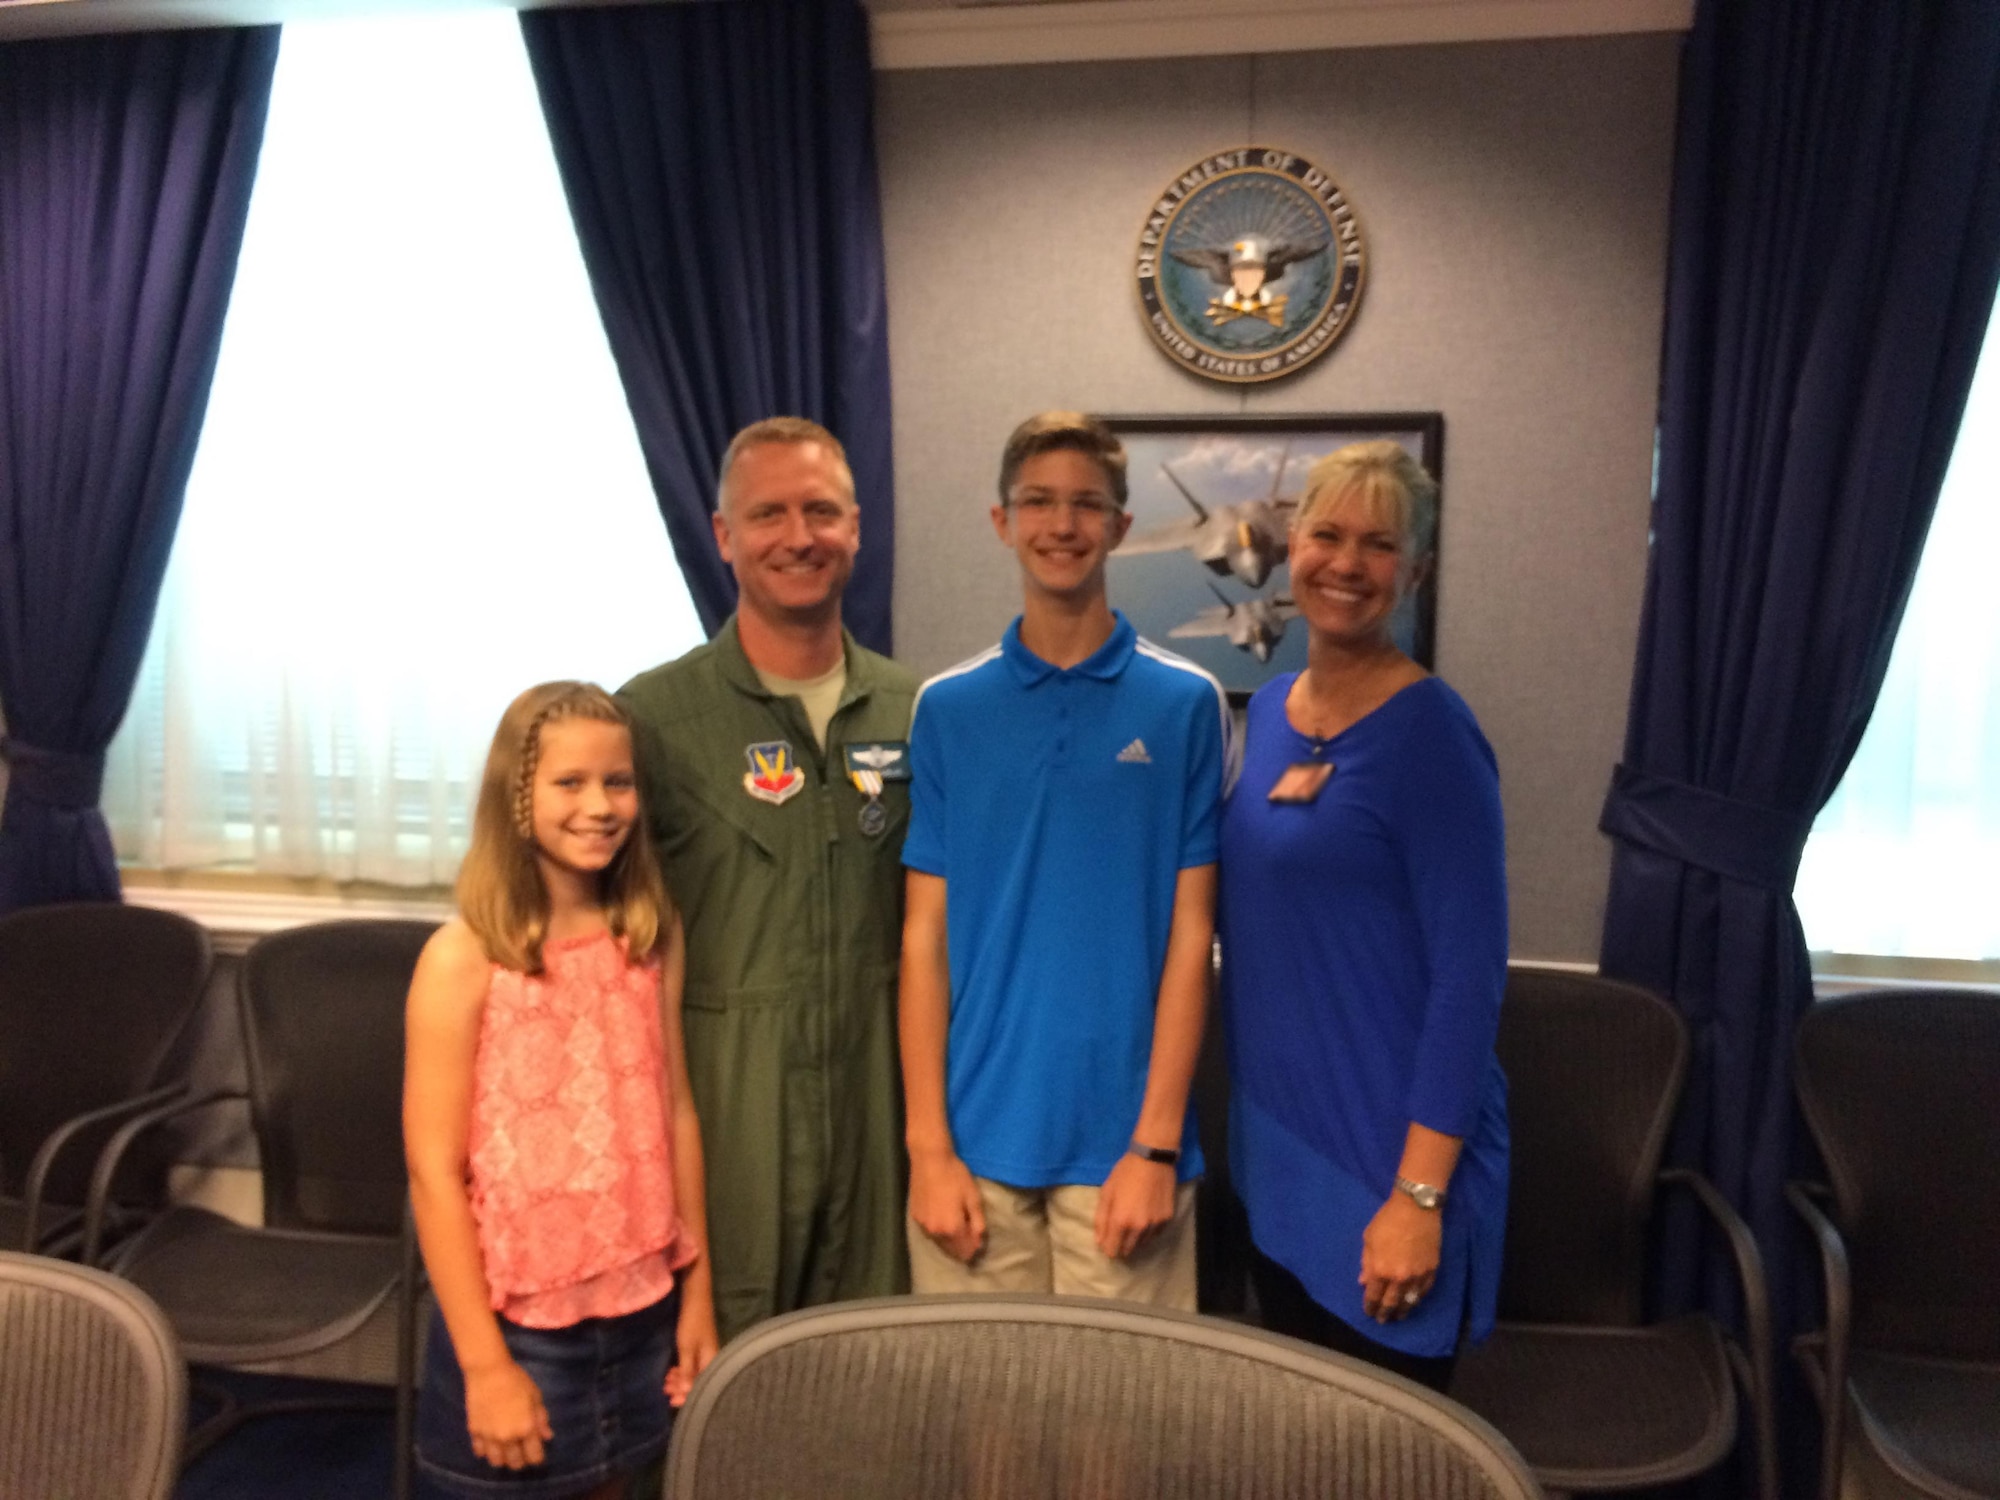 U.S. Air Force Col. Brian Laidlaw, 325th Fighter Wing vice wing commander, and his family pose for a family photo in a conference room in the Pentagon, Washington D.C.